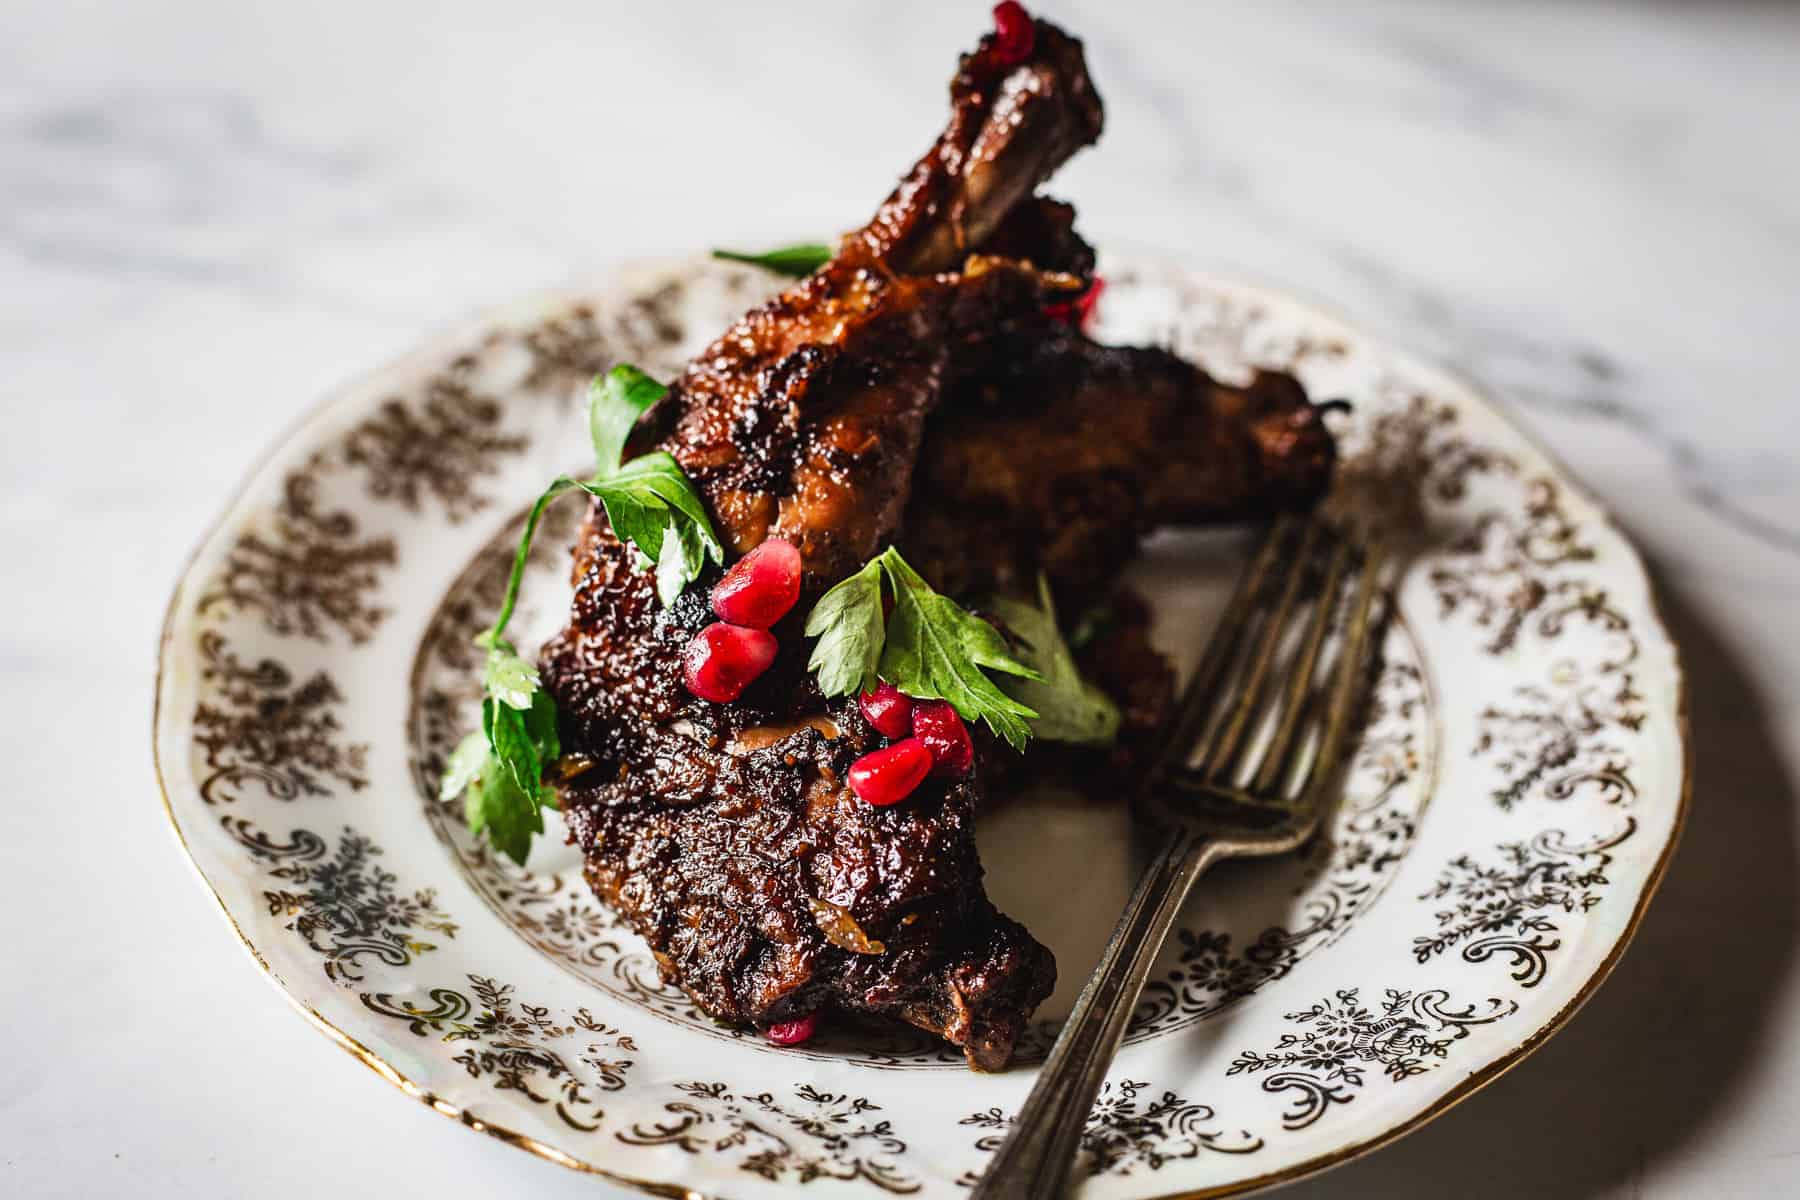 Roasted lamb chops with pomegranate on a plate.